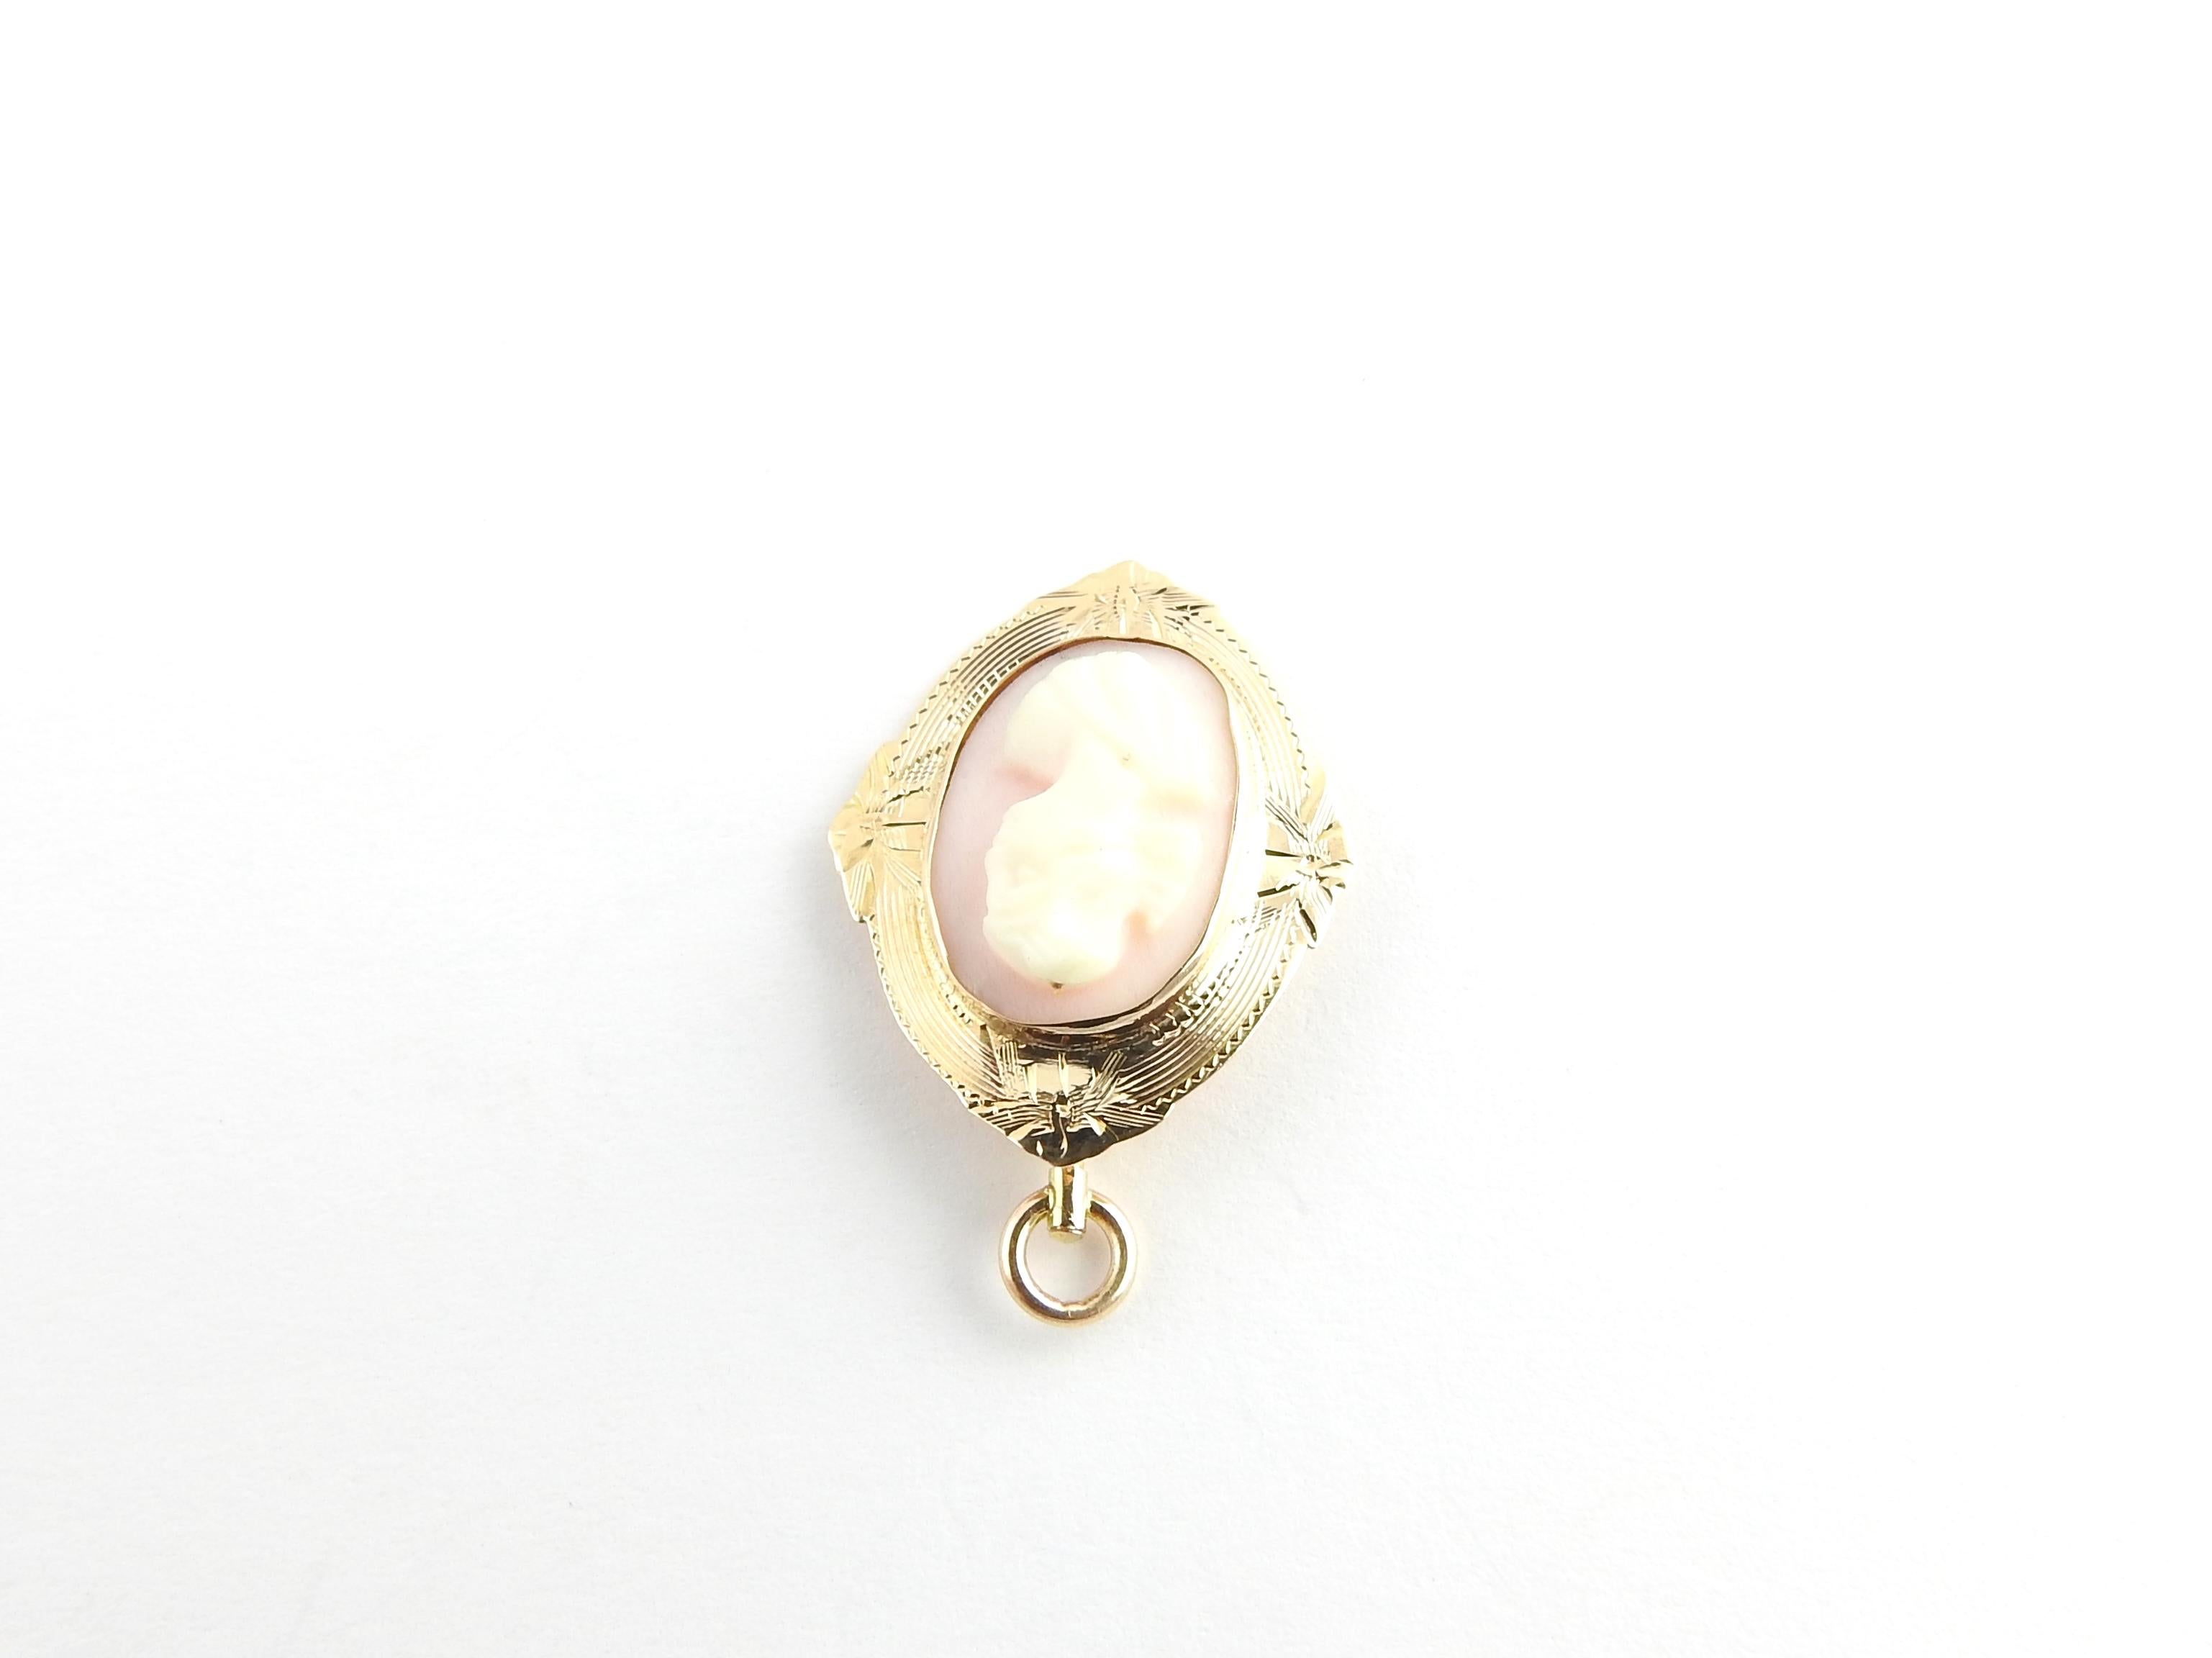 pink cameo necklace